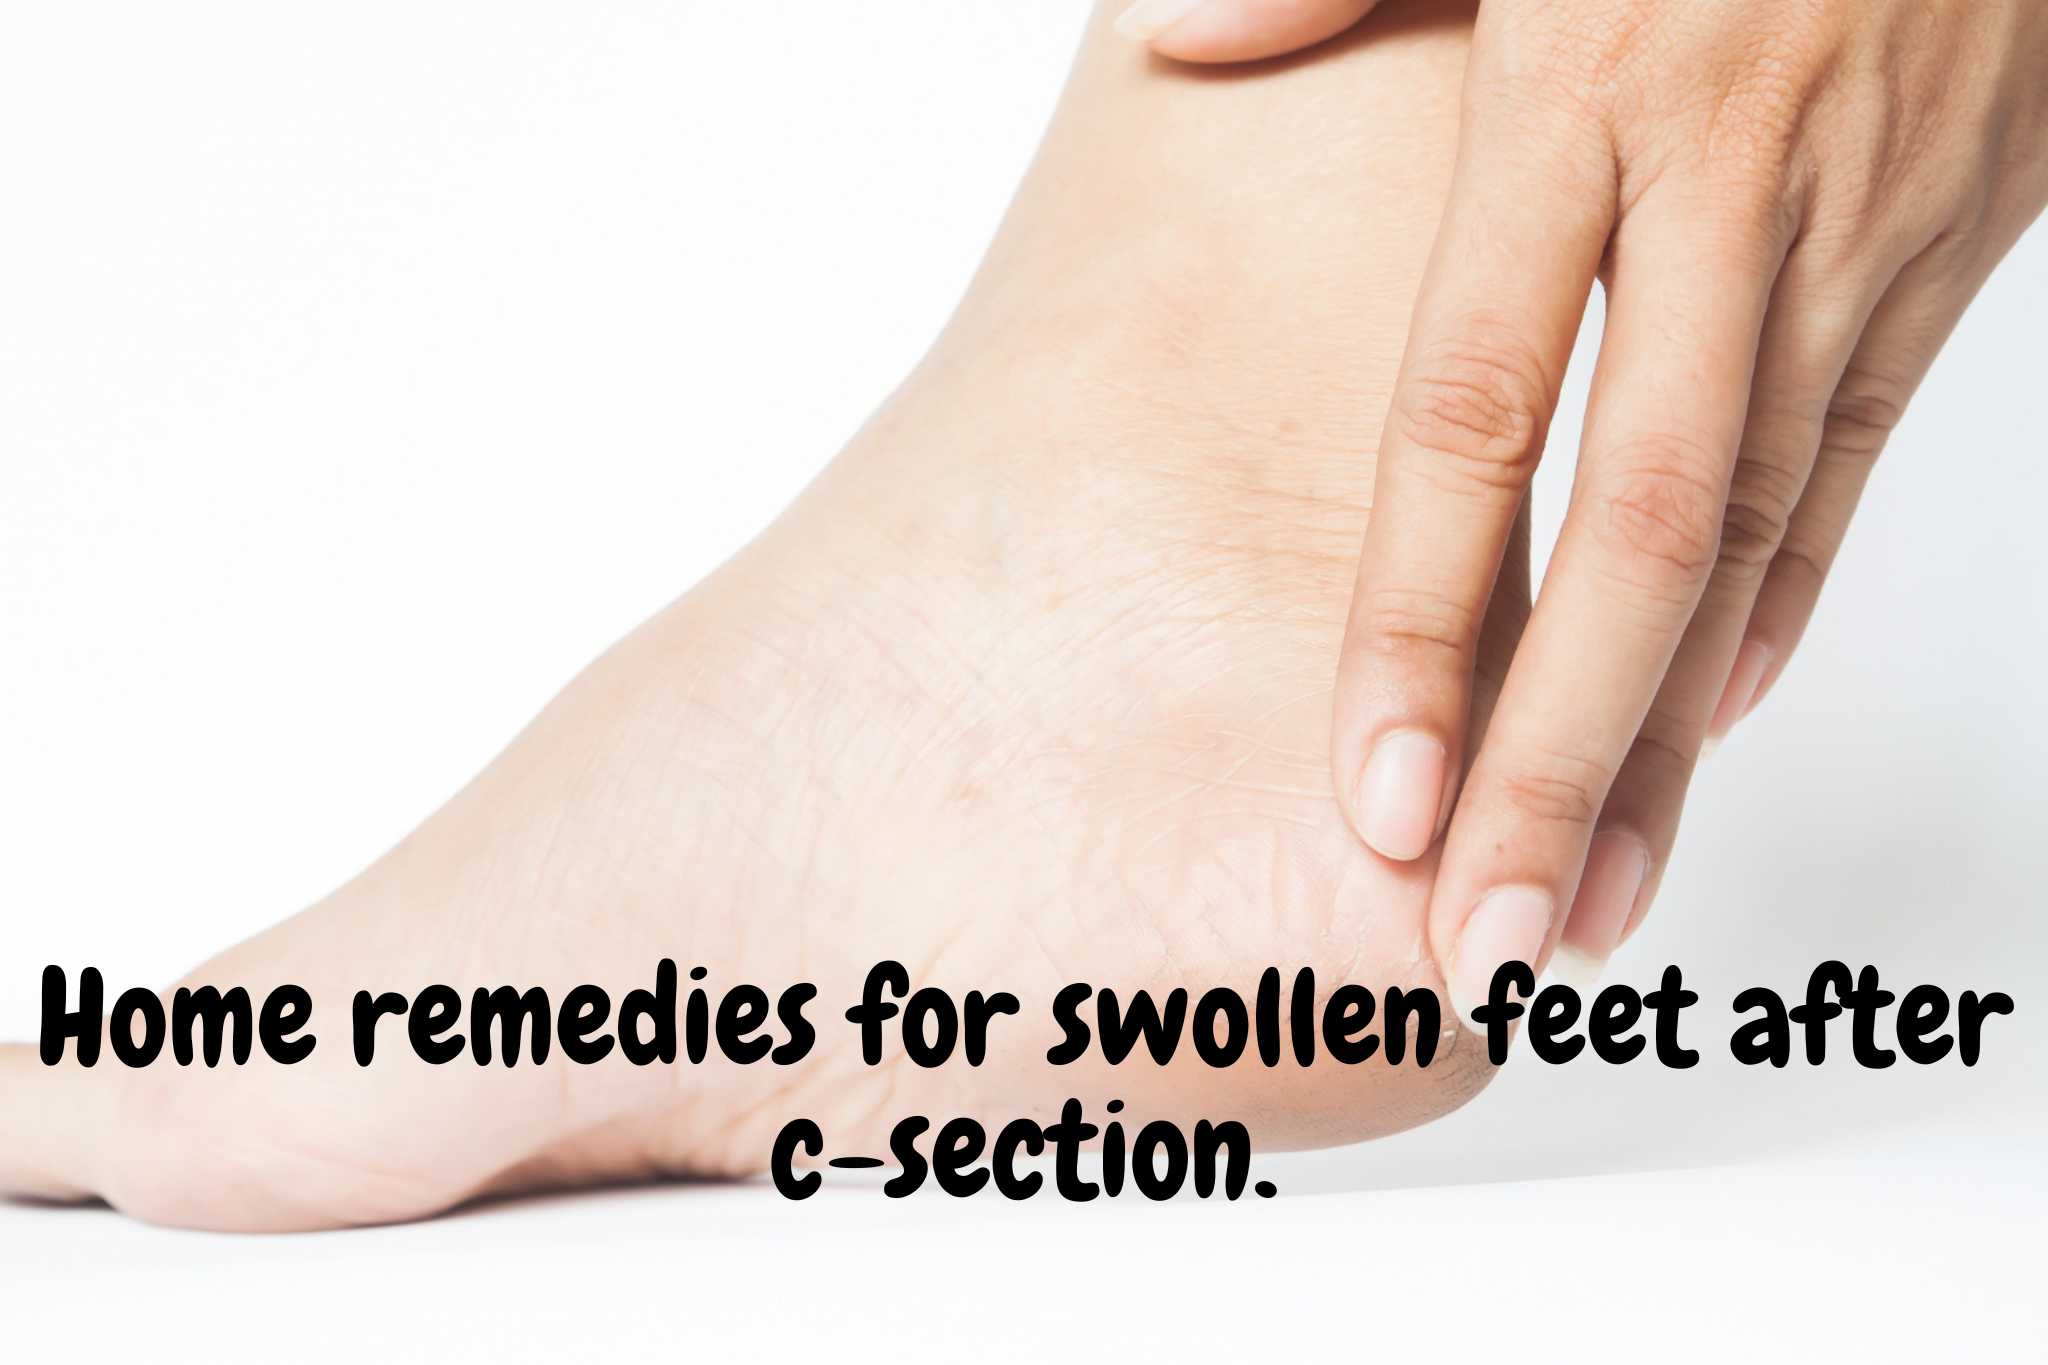 Home remedies for swollen feet after c-section.